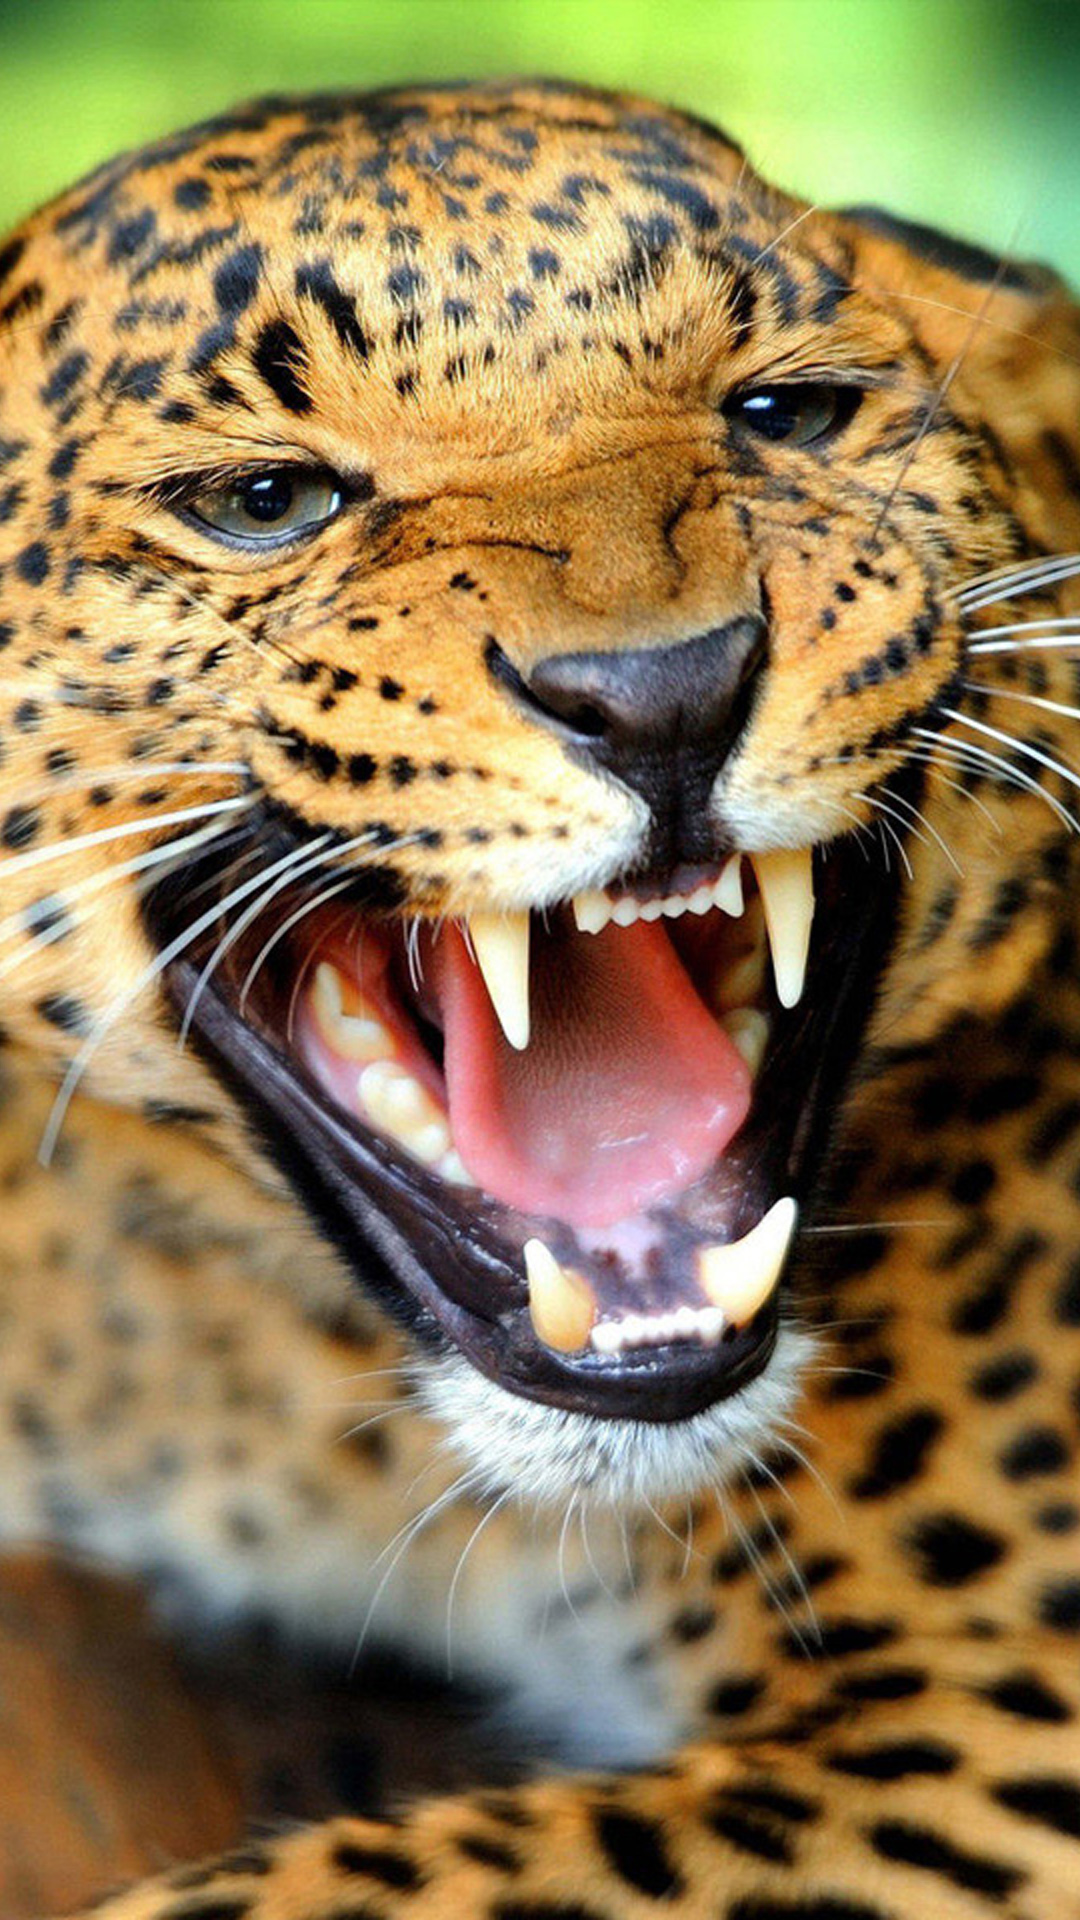 Crazy angry leopard iphone 6 plus wallpaper | iPhone 6 Plus ...